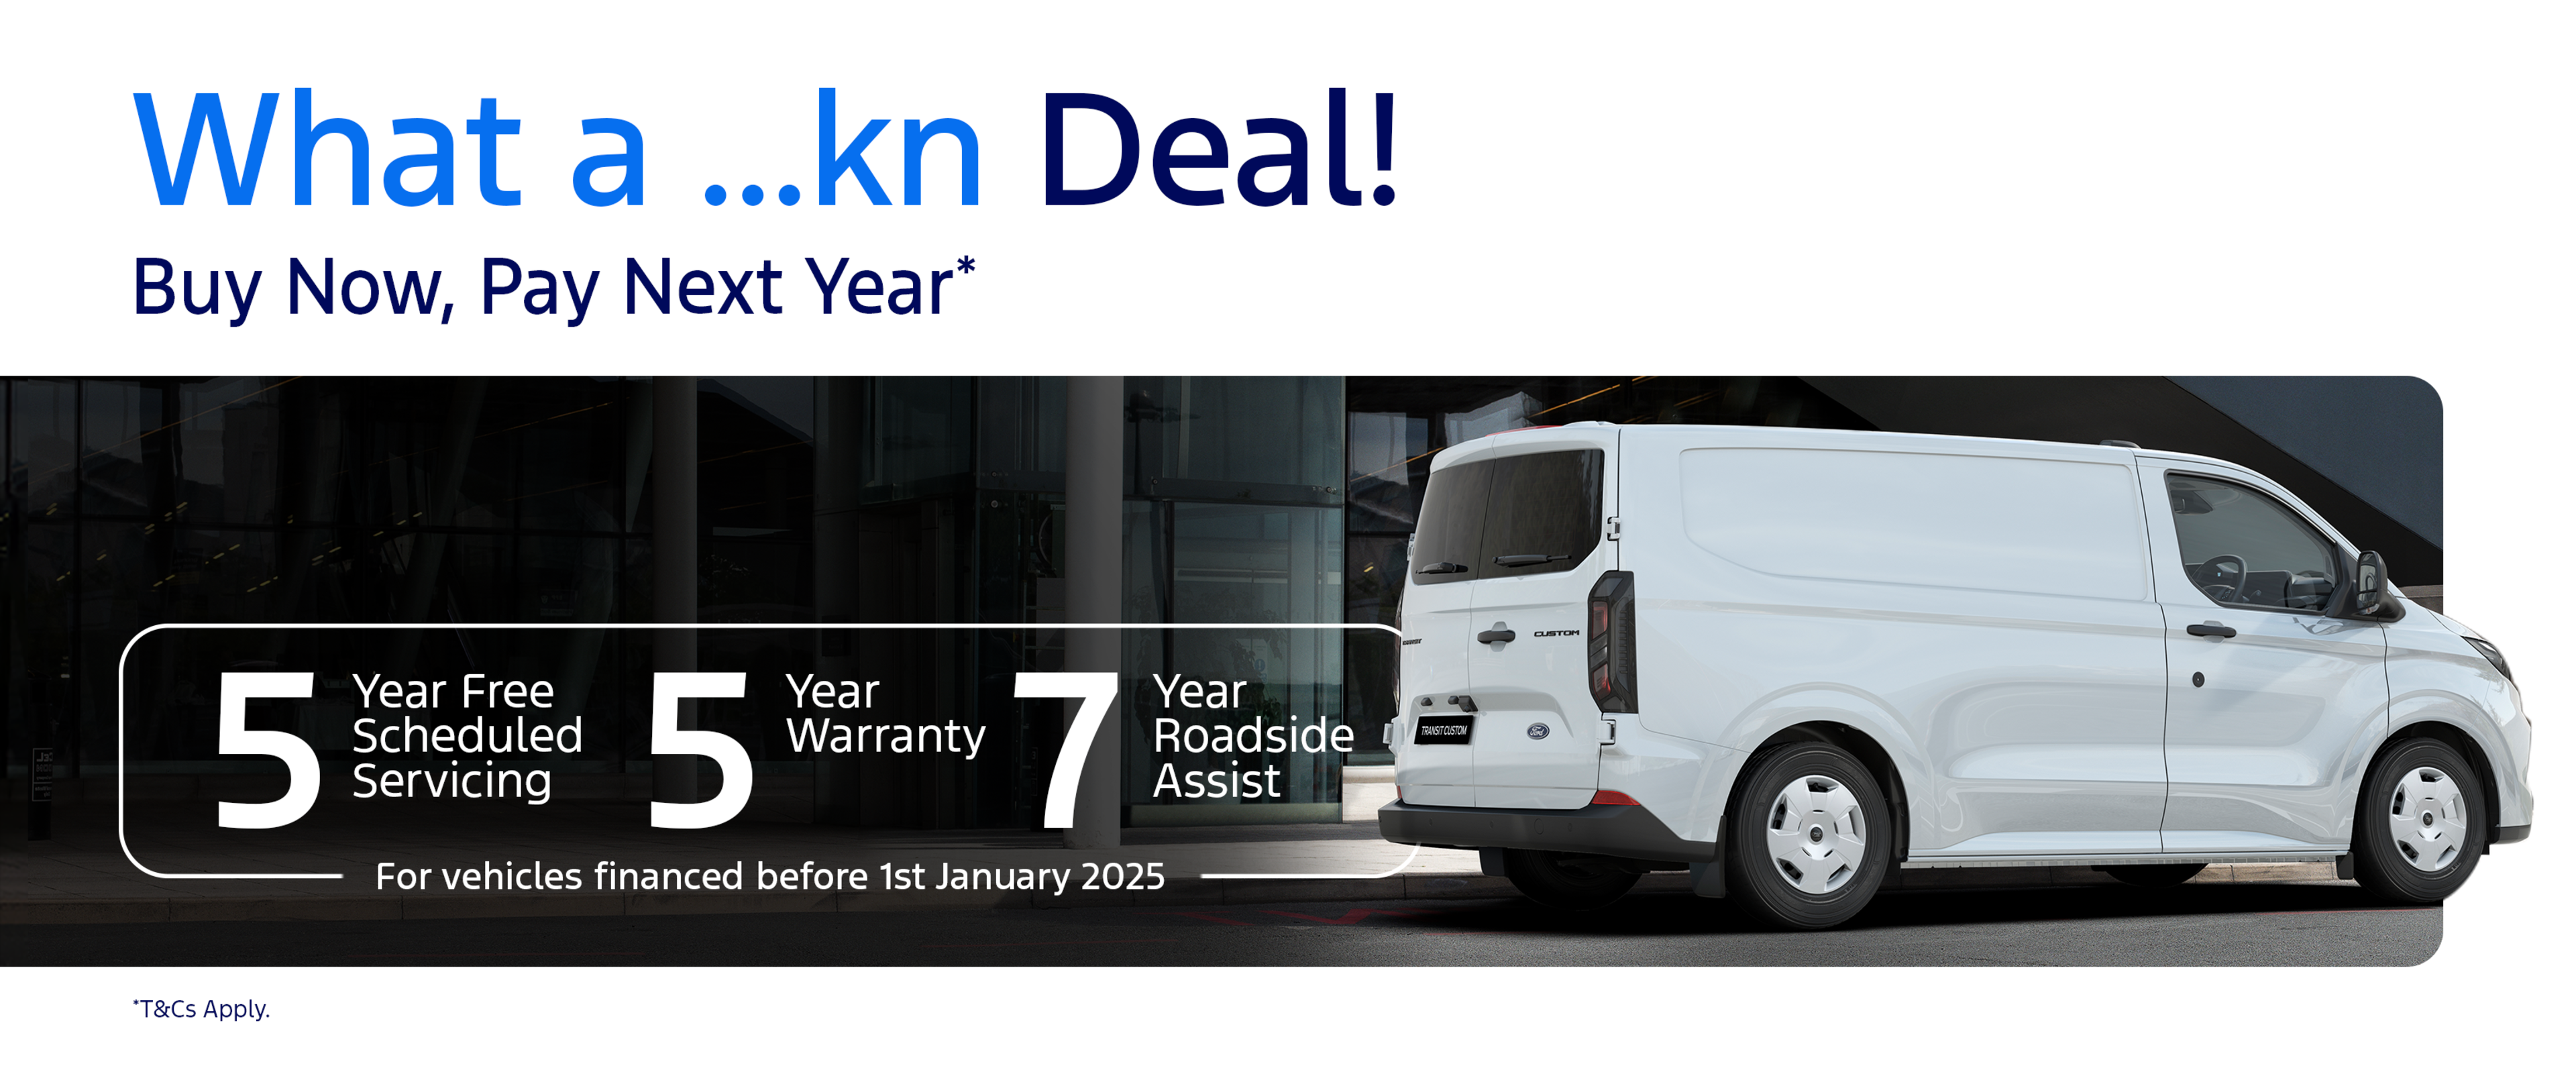 What a kn Deal! All-New Transit Custom